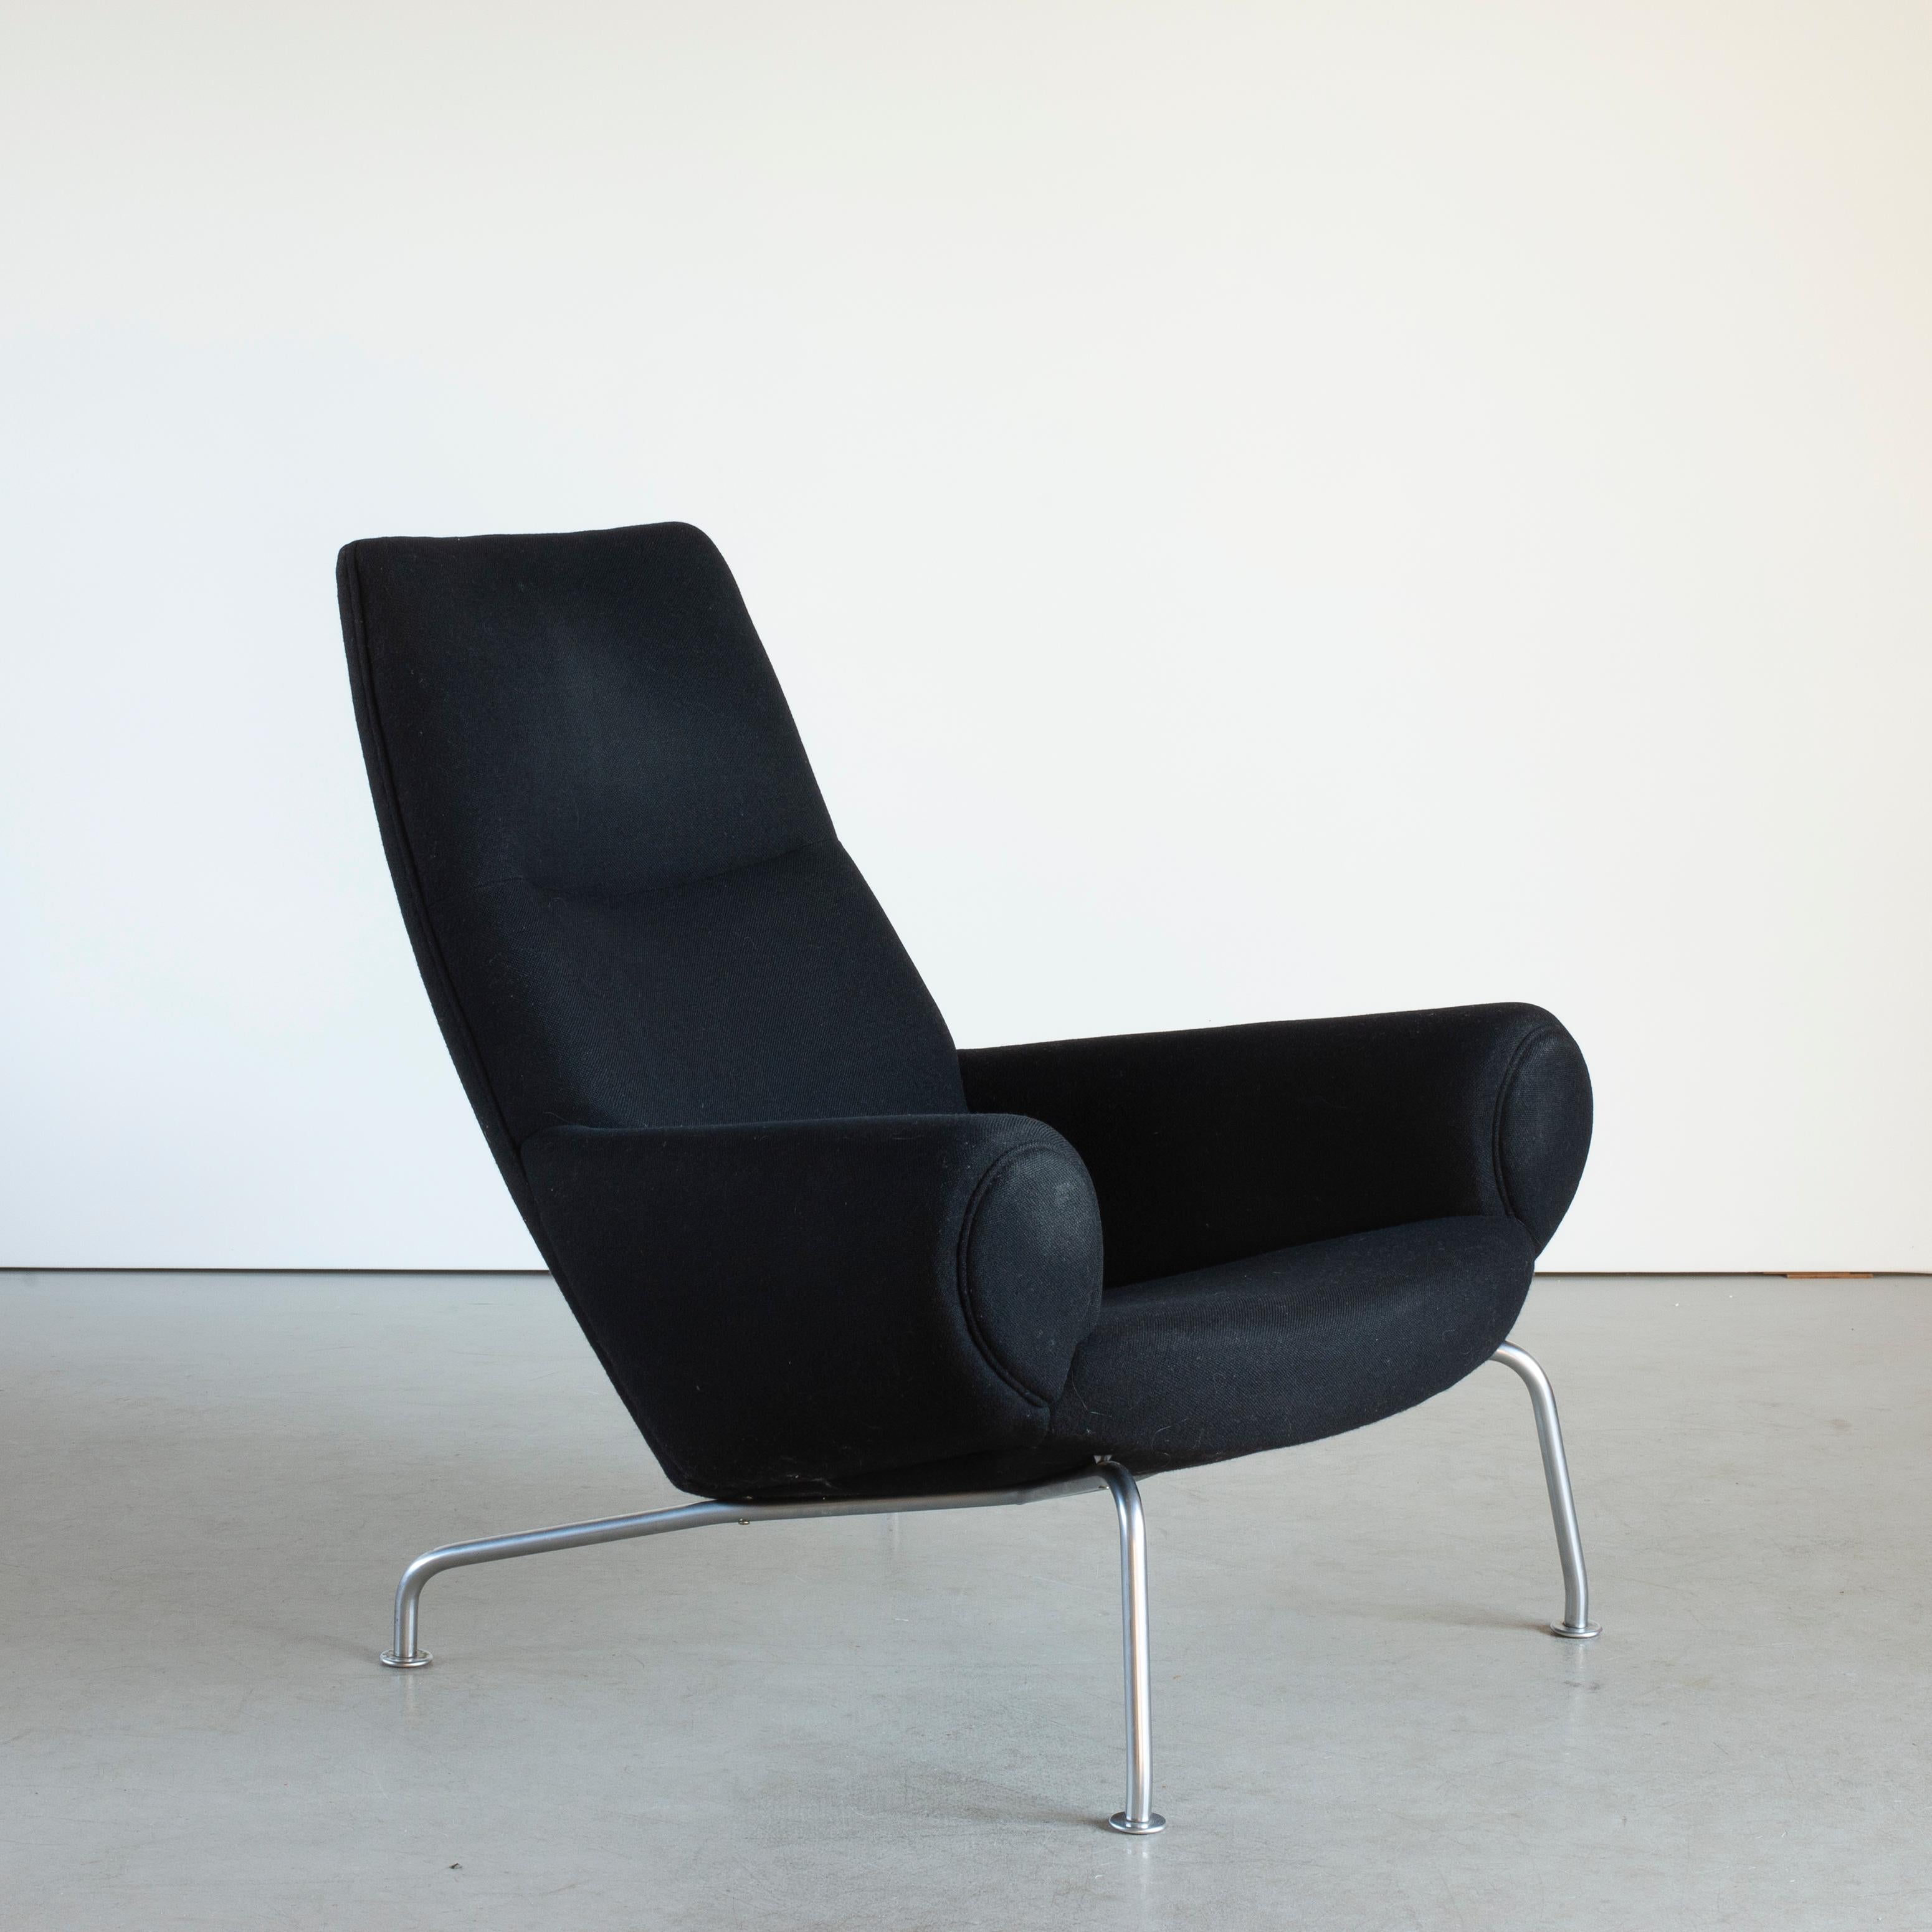 Hans J. Wegner Ox-chair Queen model AP-47. Easy chair with tubular steel frame. Sides, seat and back upholstered with grey fabric.

Executed by AP-Stolen, Copenhagen, Denmark.